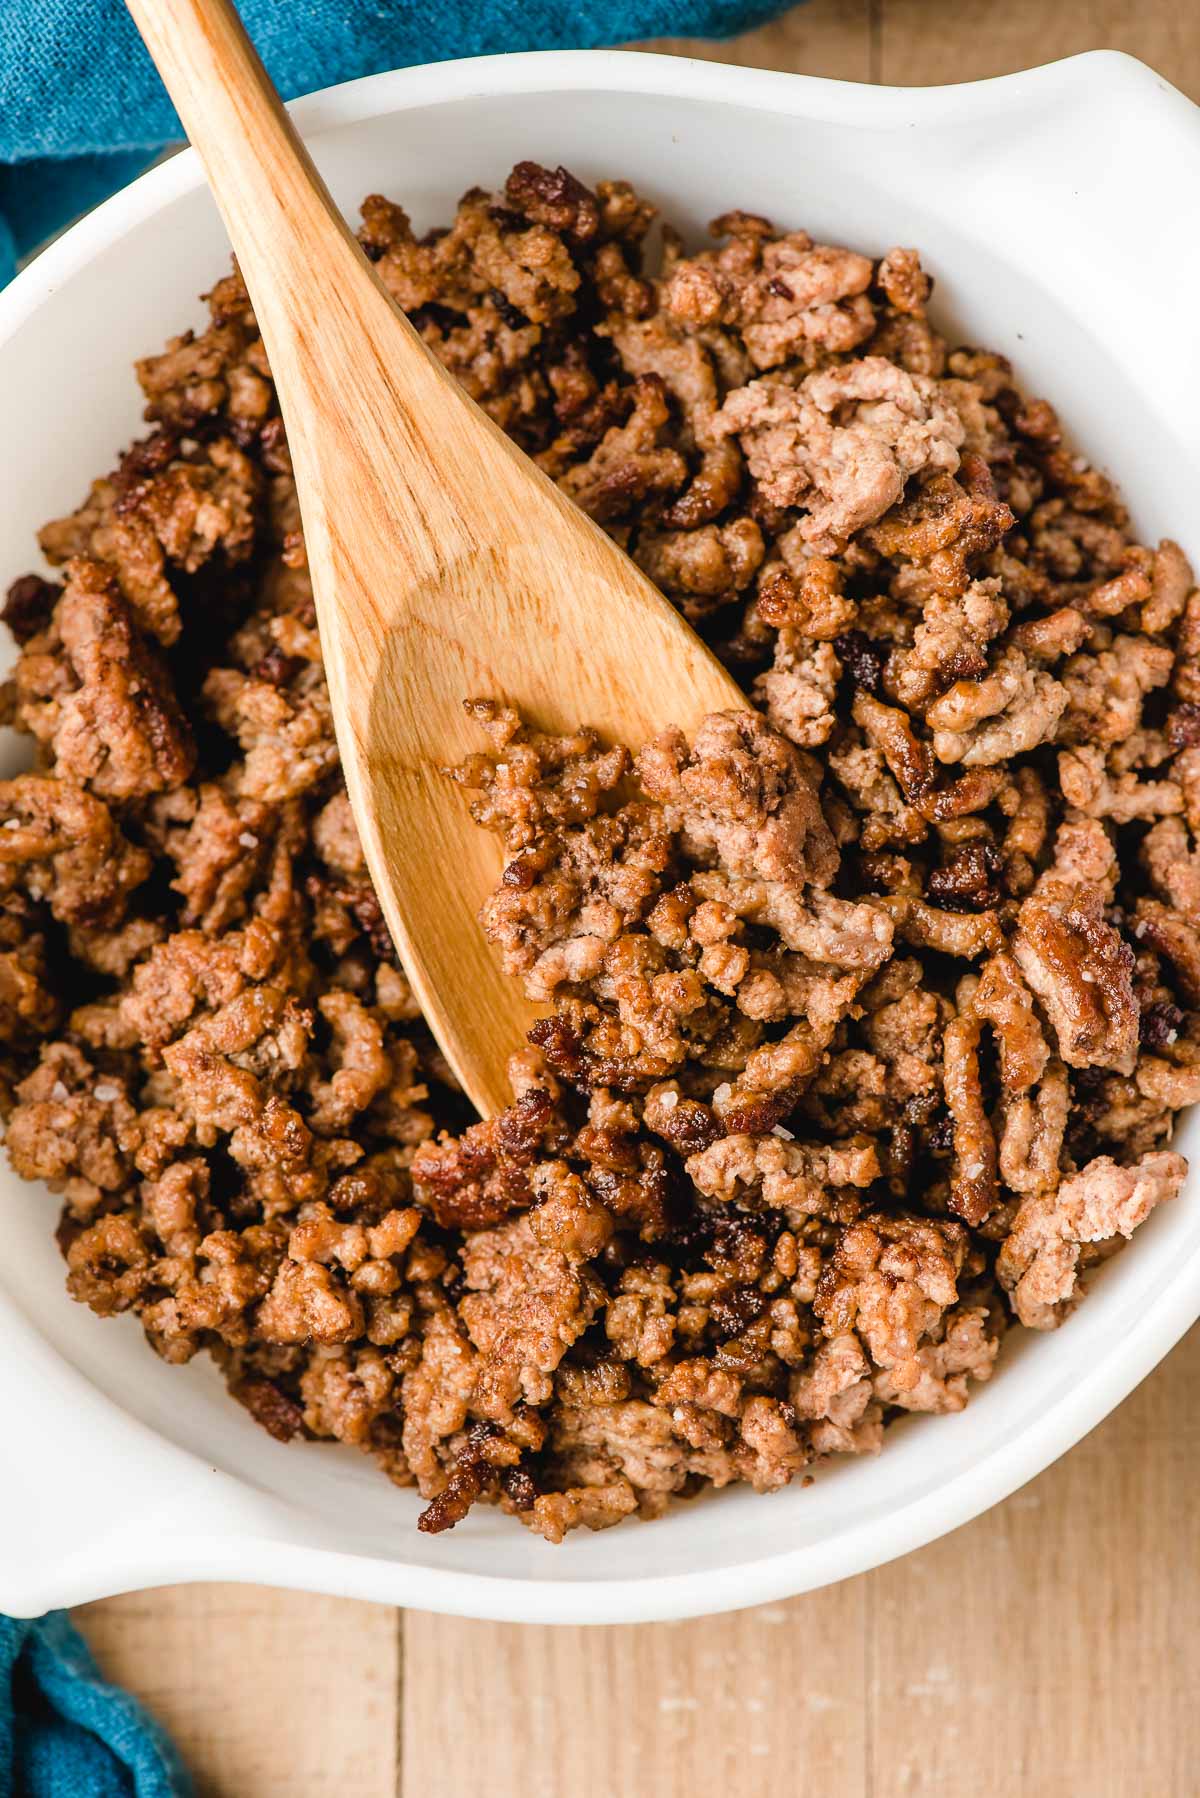 Wooden spoon scooping up cooked ground beef.